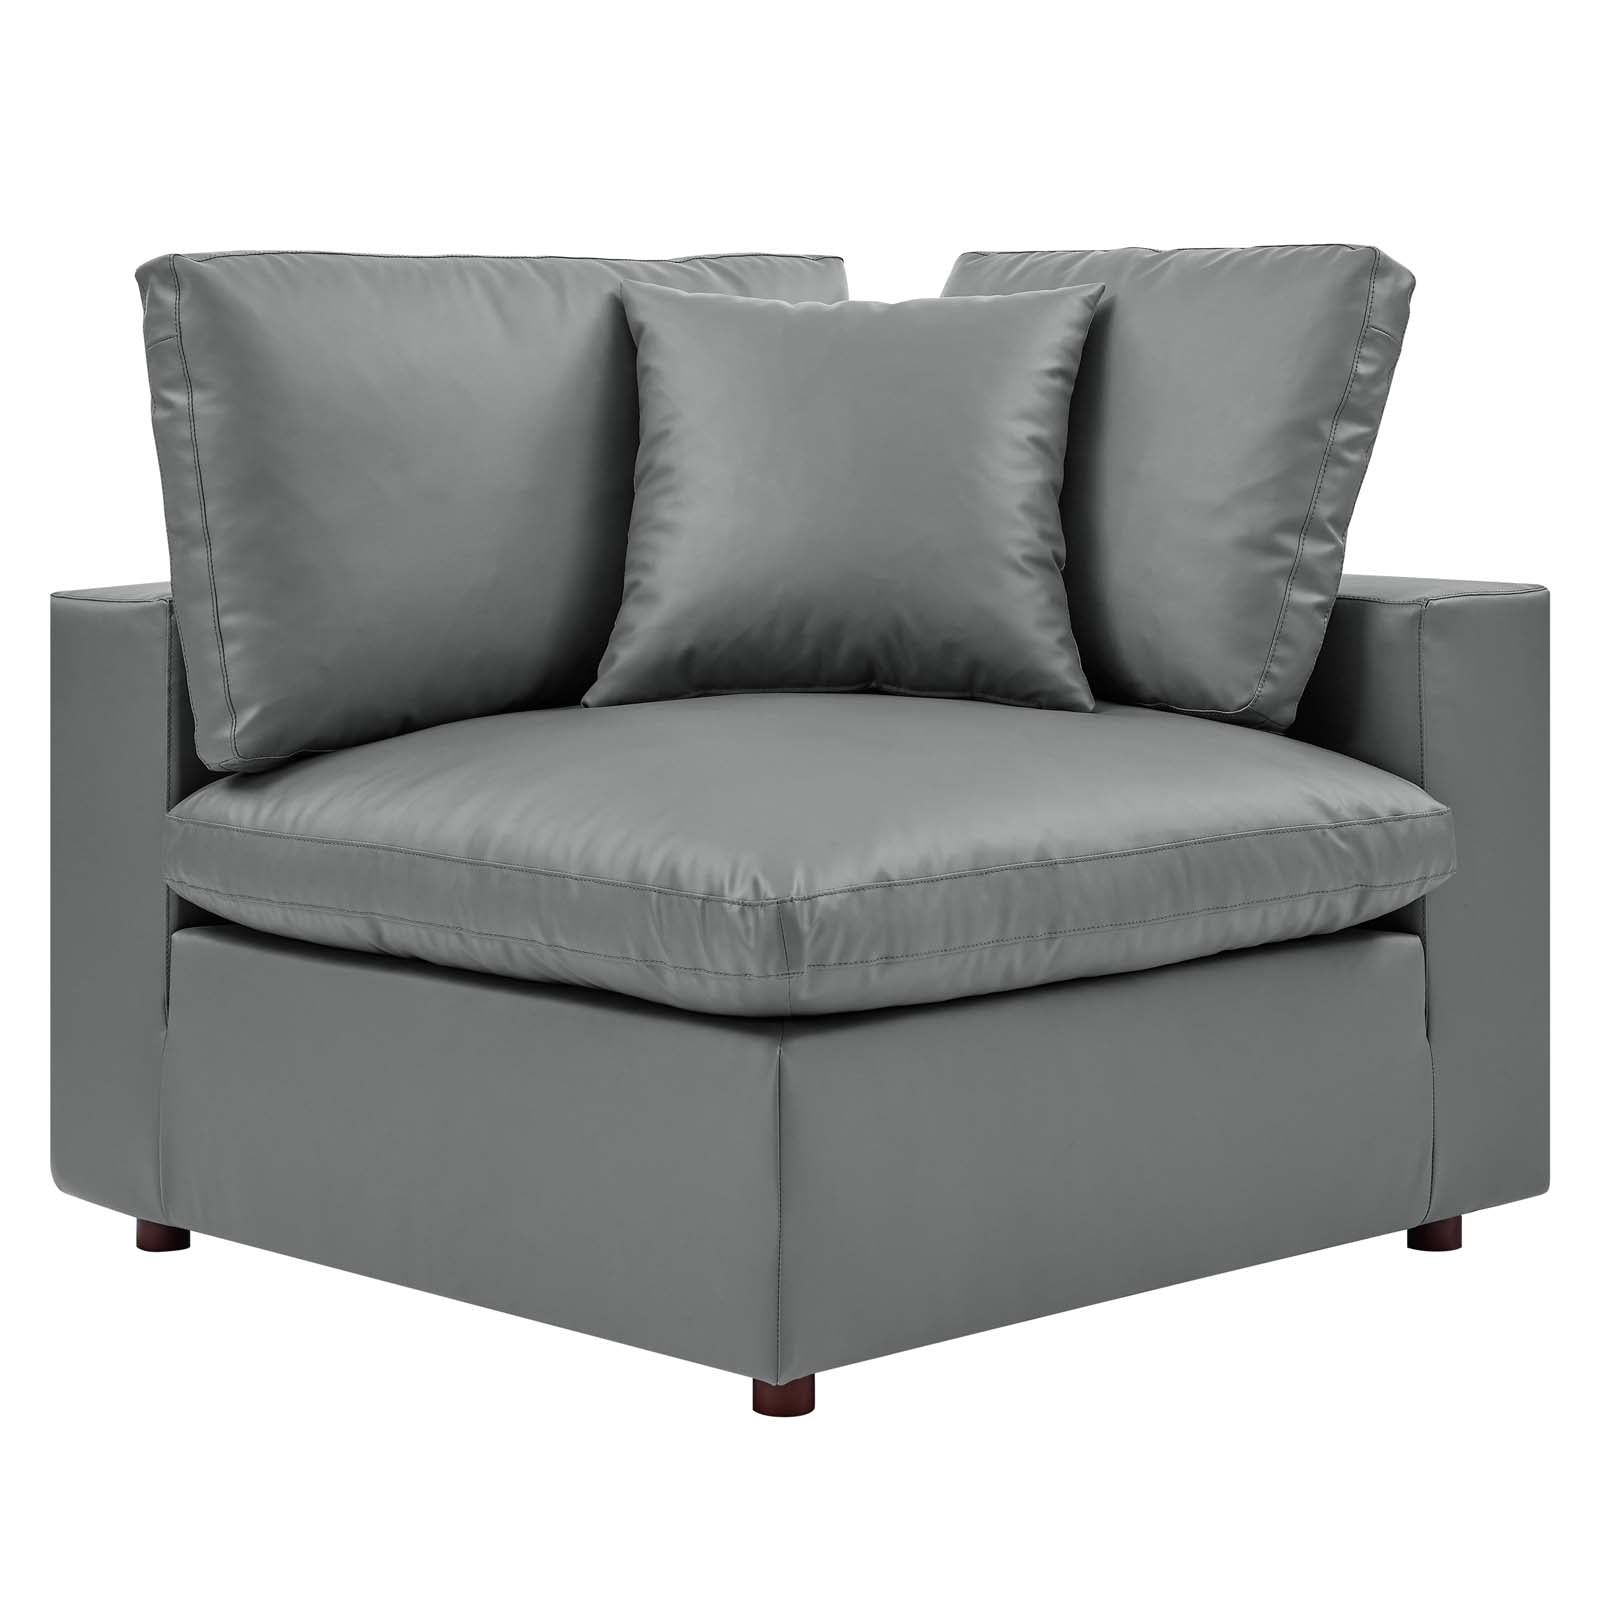 Modway Sectional Sofas - Commix Down Filled Overstuffed Vegan Leather 8 Piece Sectional Sofa Gray